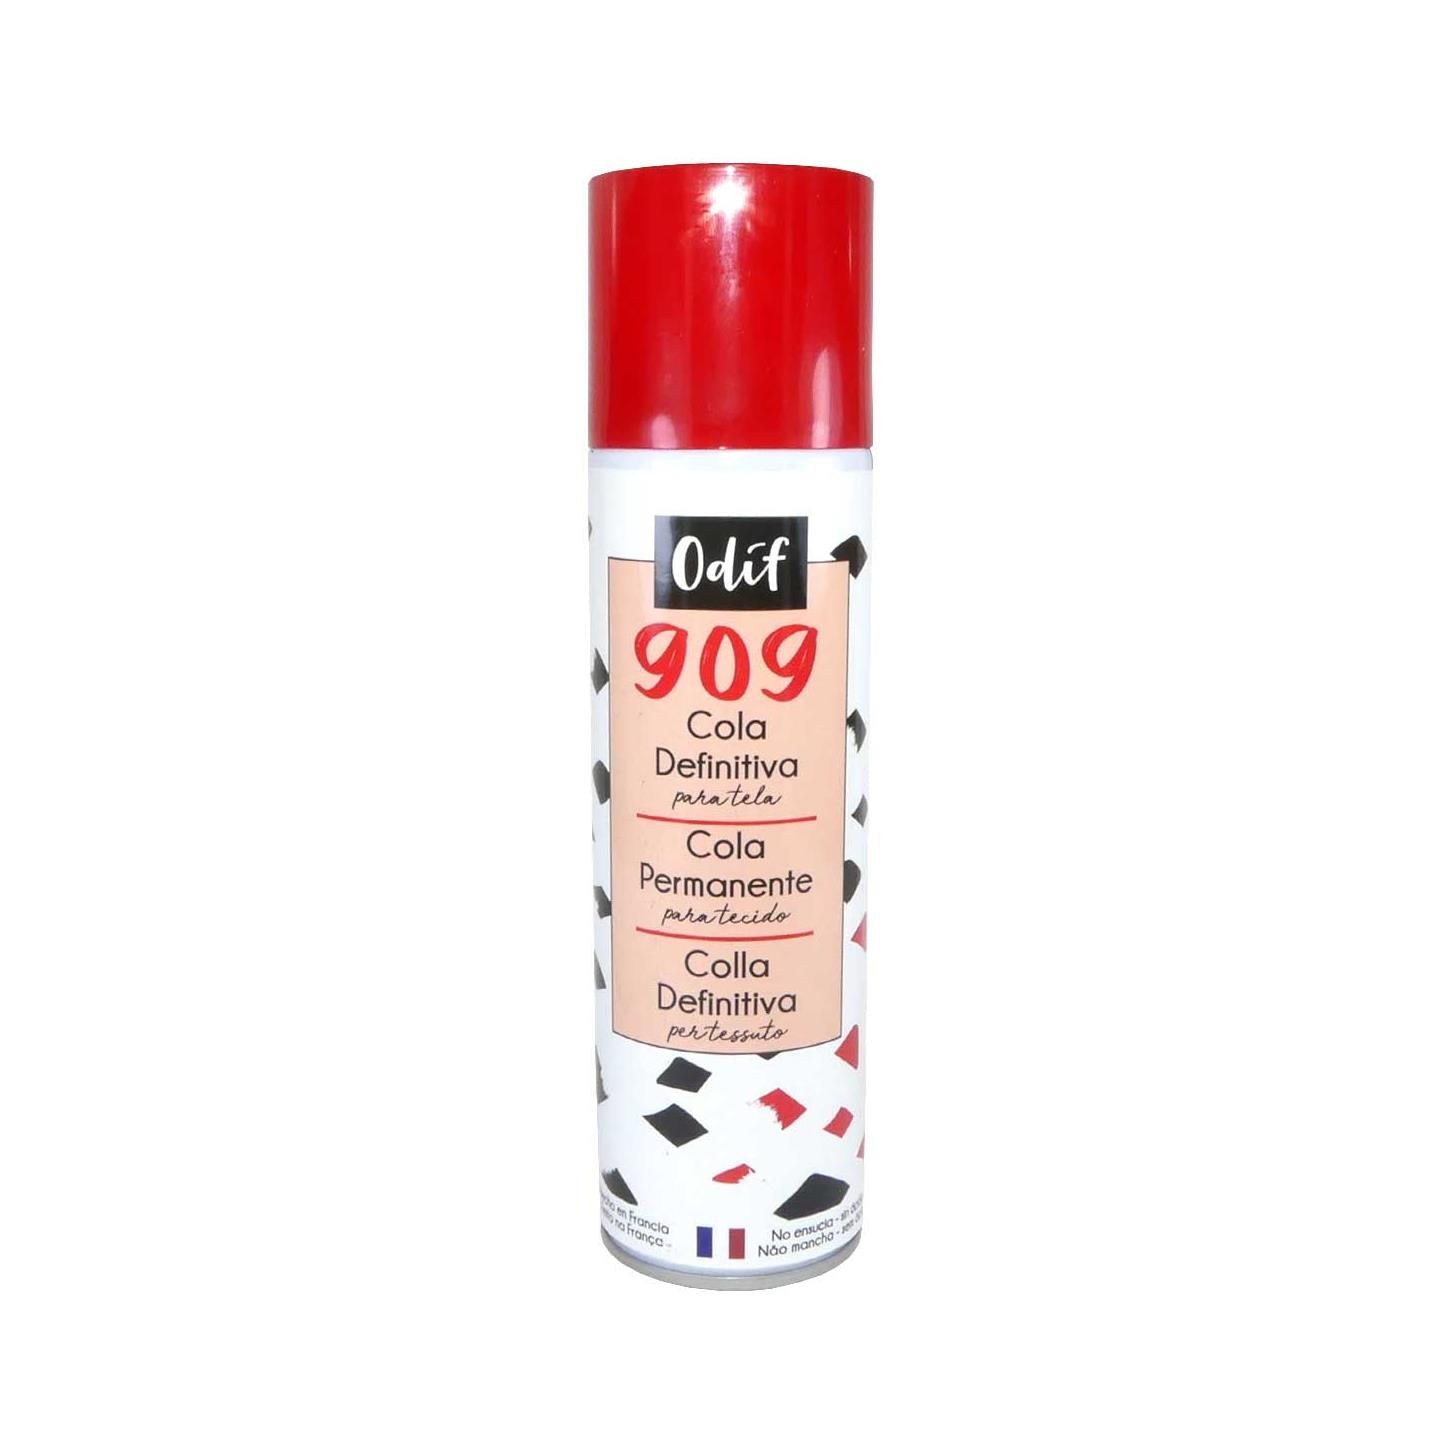 Odif 909 permanent fabric adhesive 250ml for a strong and long-lasting bond